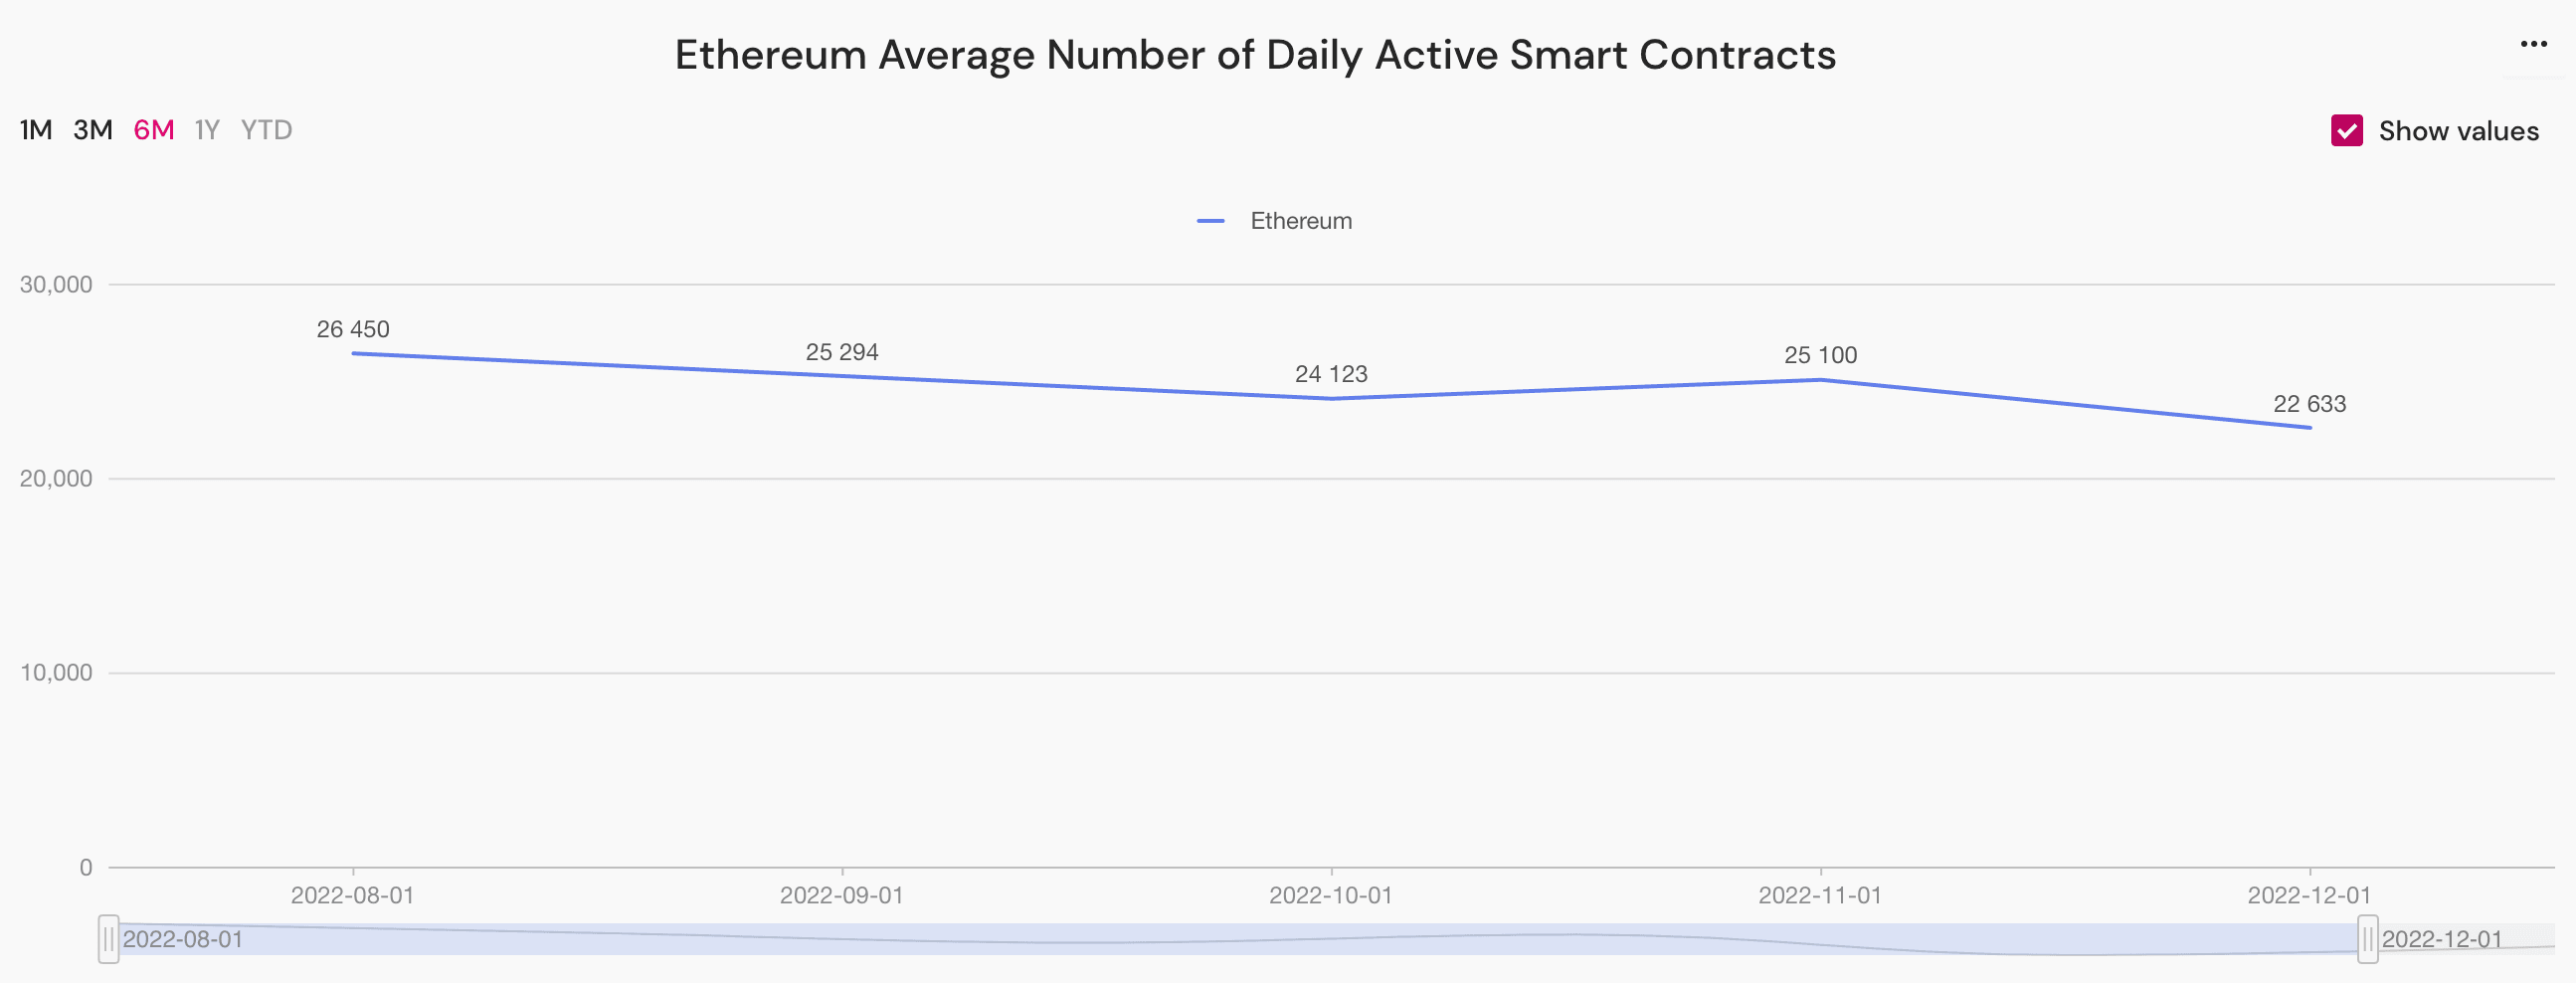 ethereum average number of daily active smart contracts